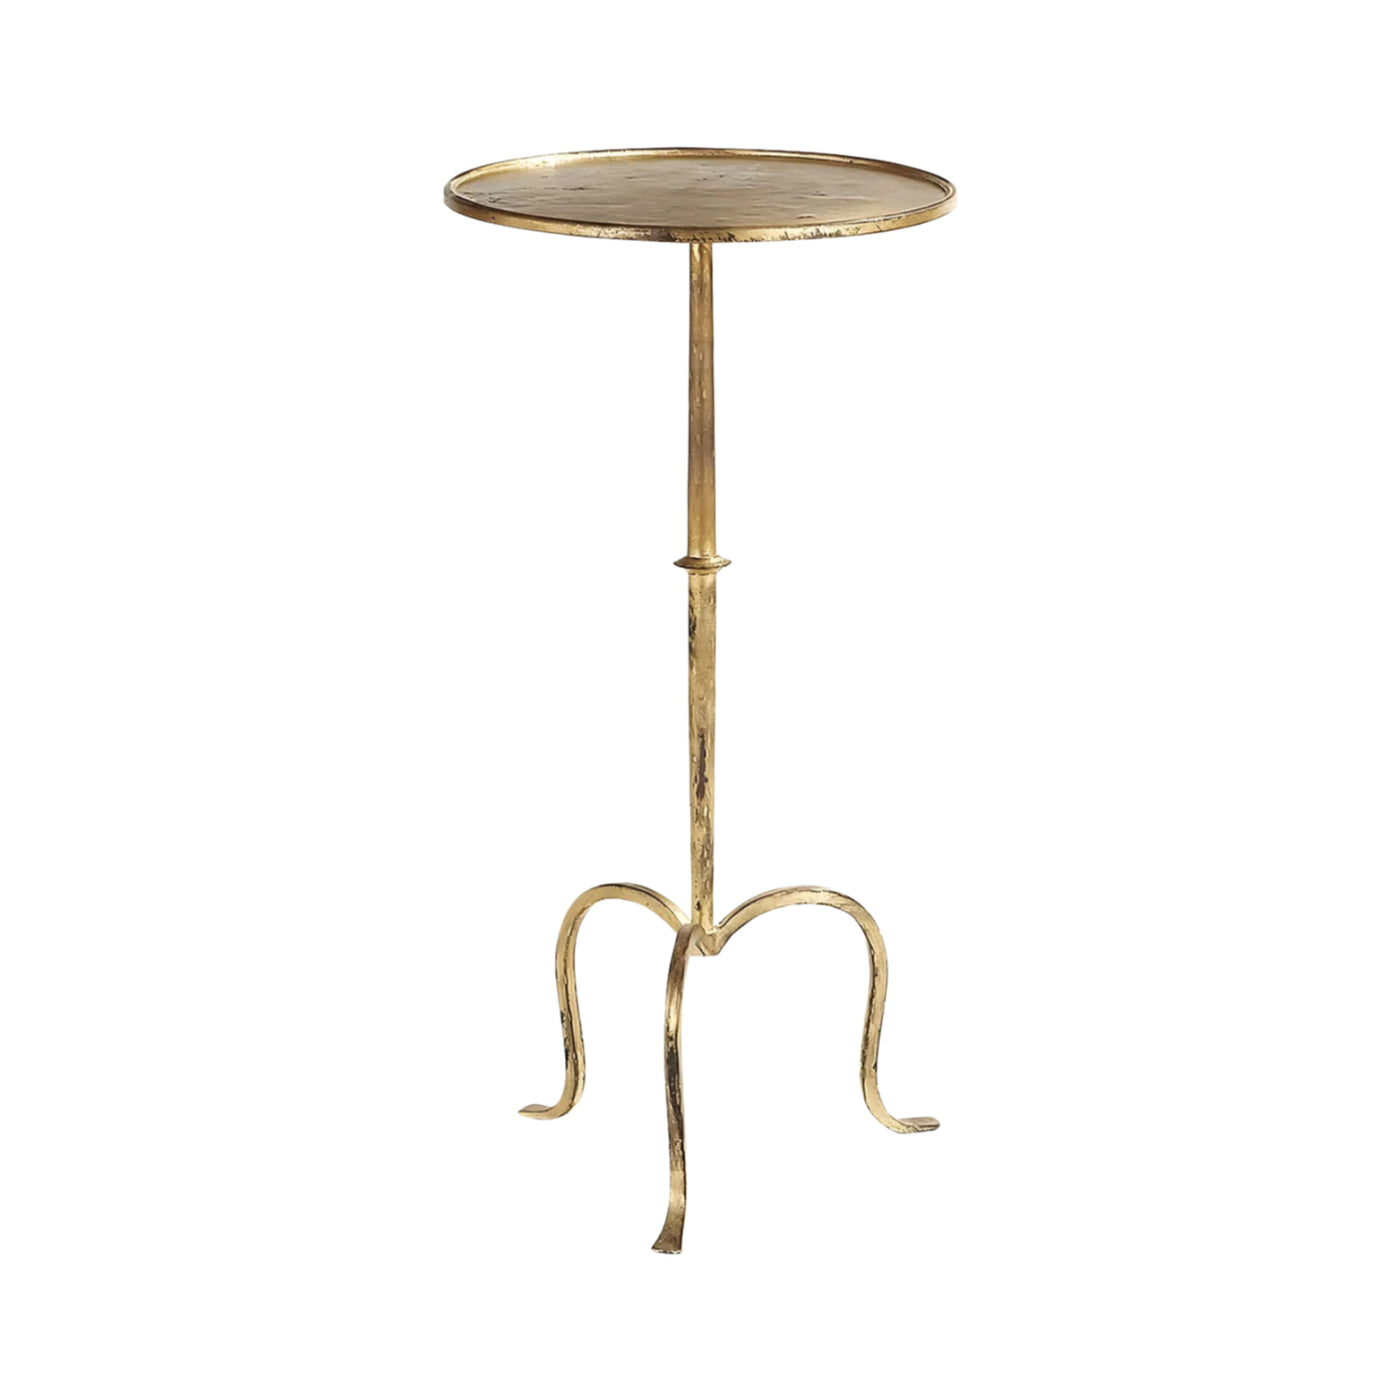 Gilded martini table